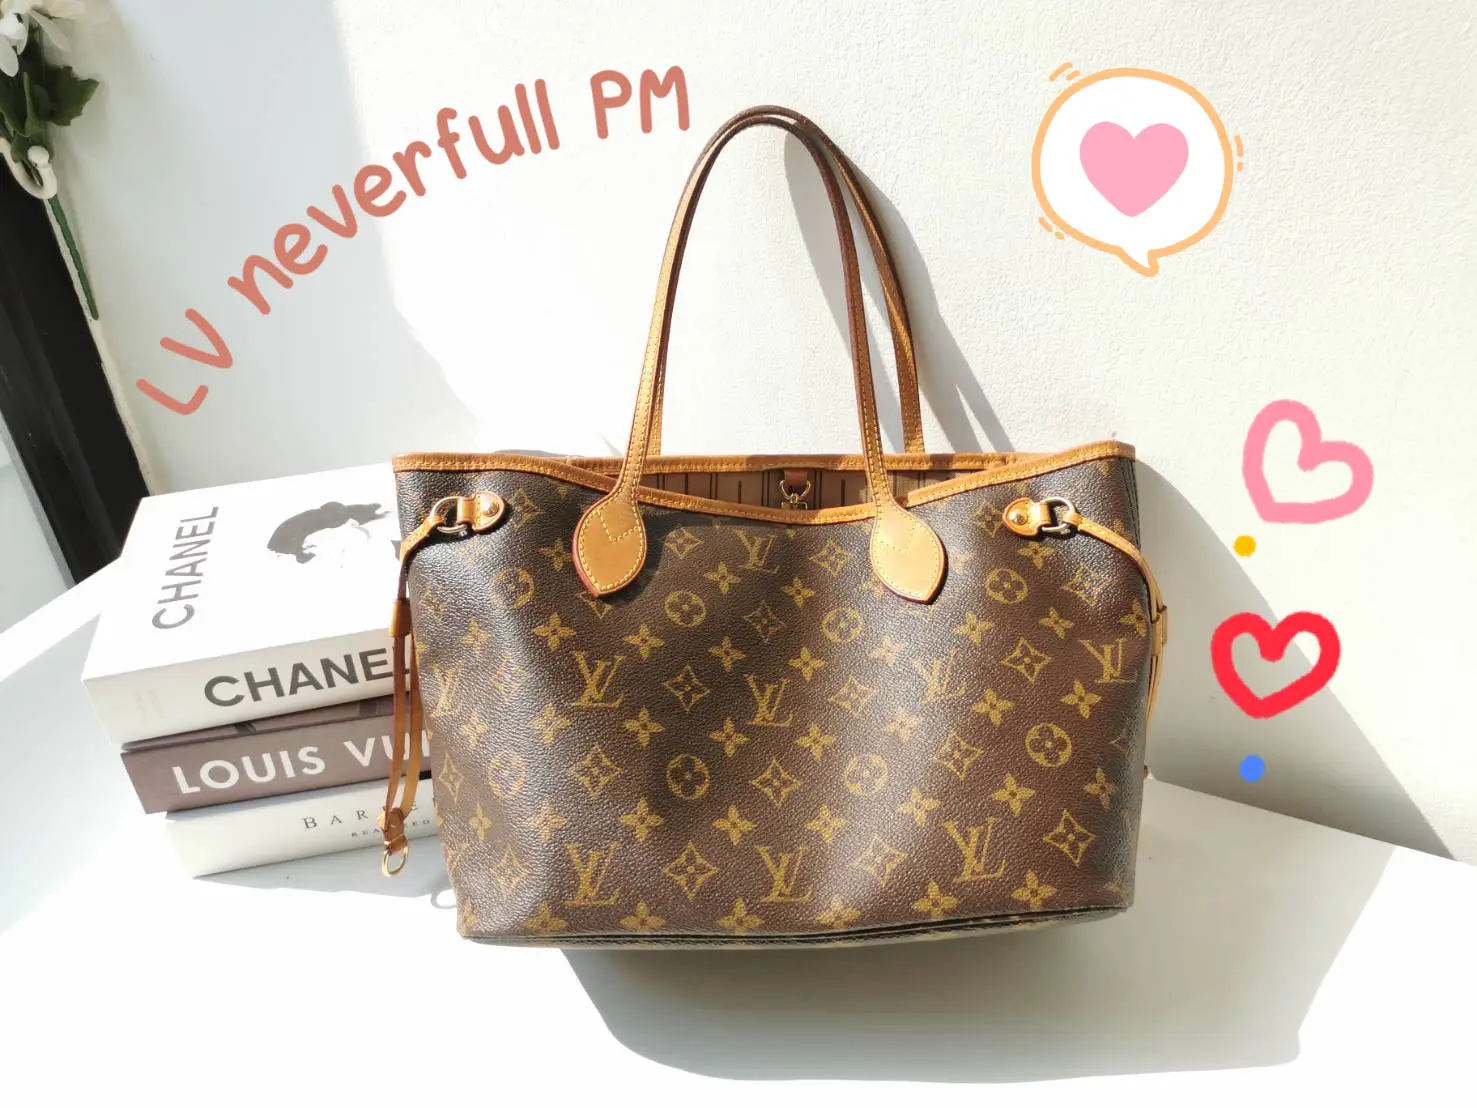 LOUIS VUITTON 2011 pre-owned Neverfull MM tote bag, Gallery posted by  Lexie